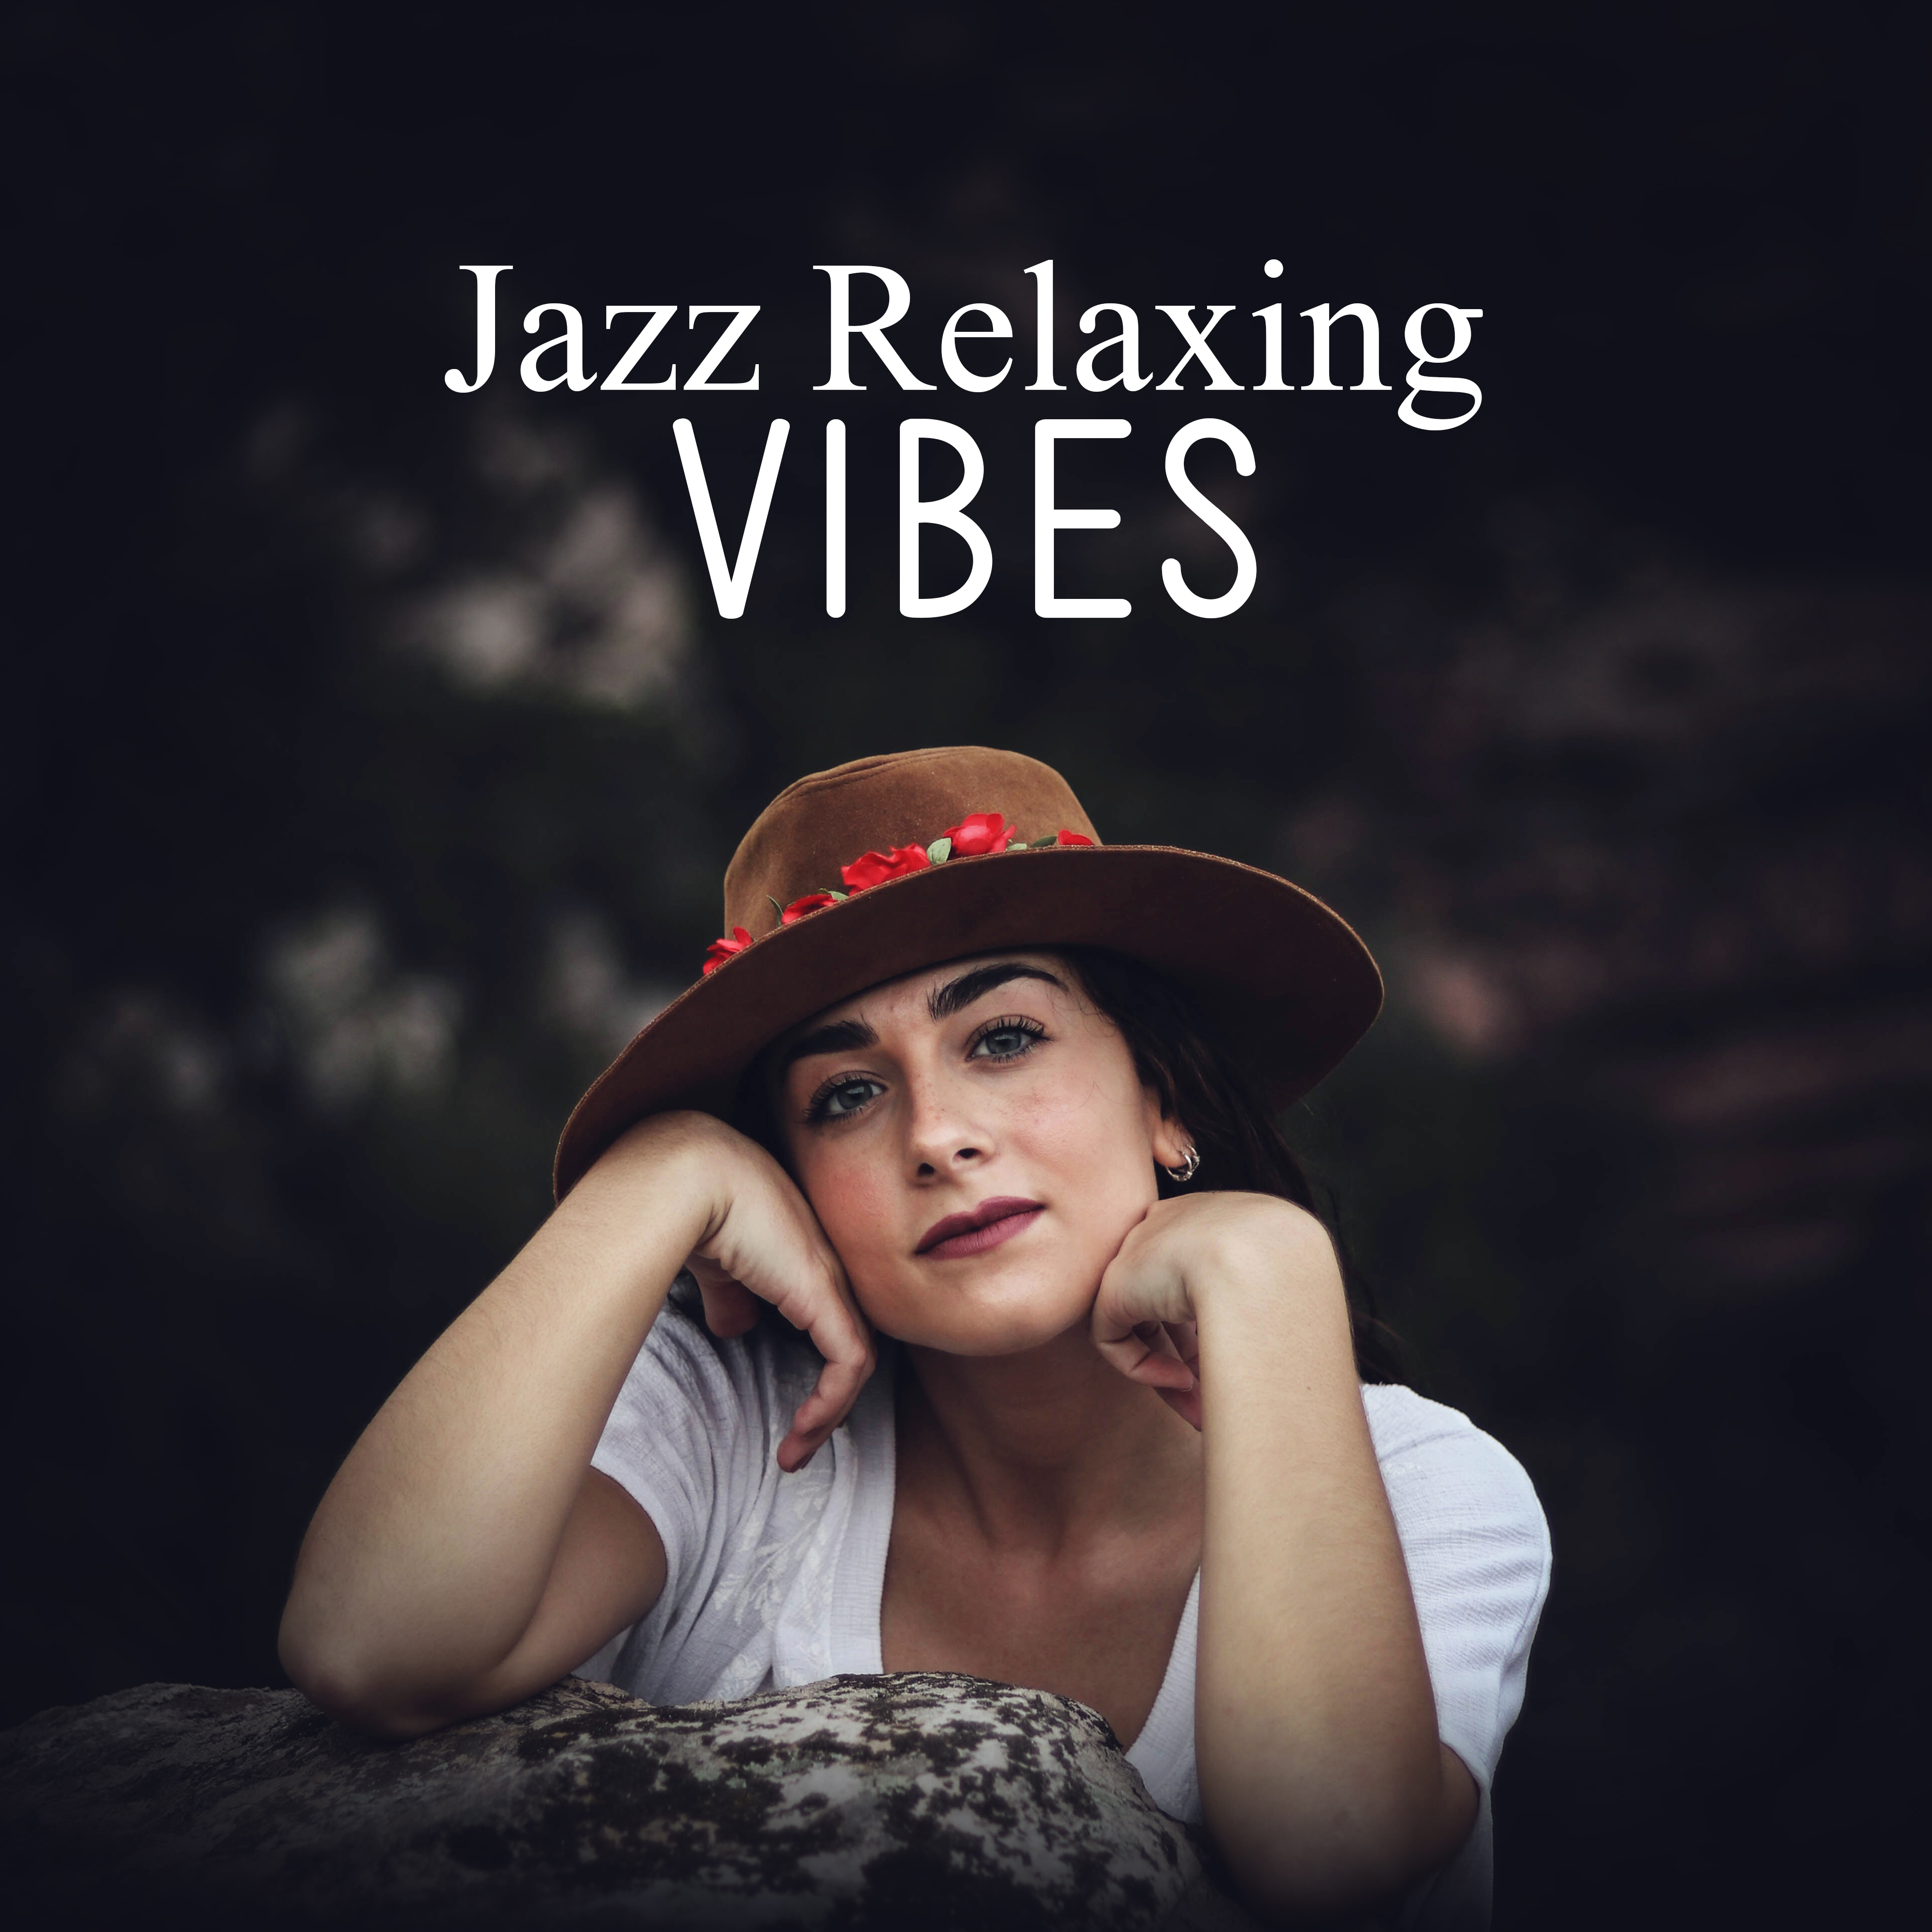 Jazz Relaxing Vibes